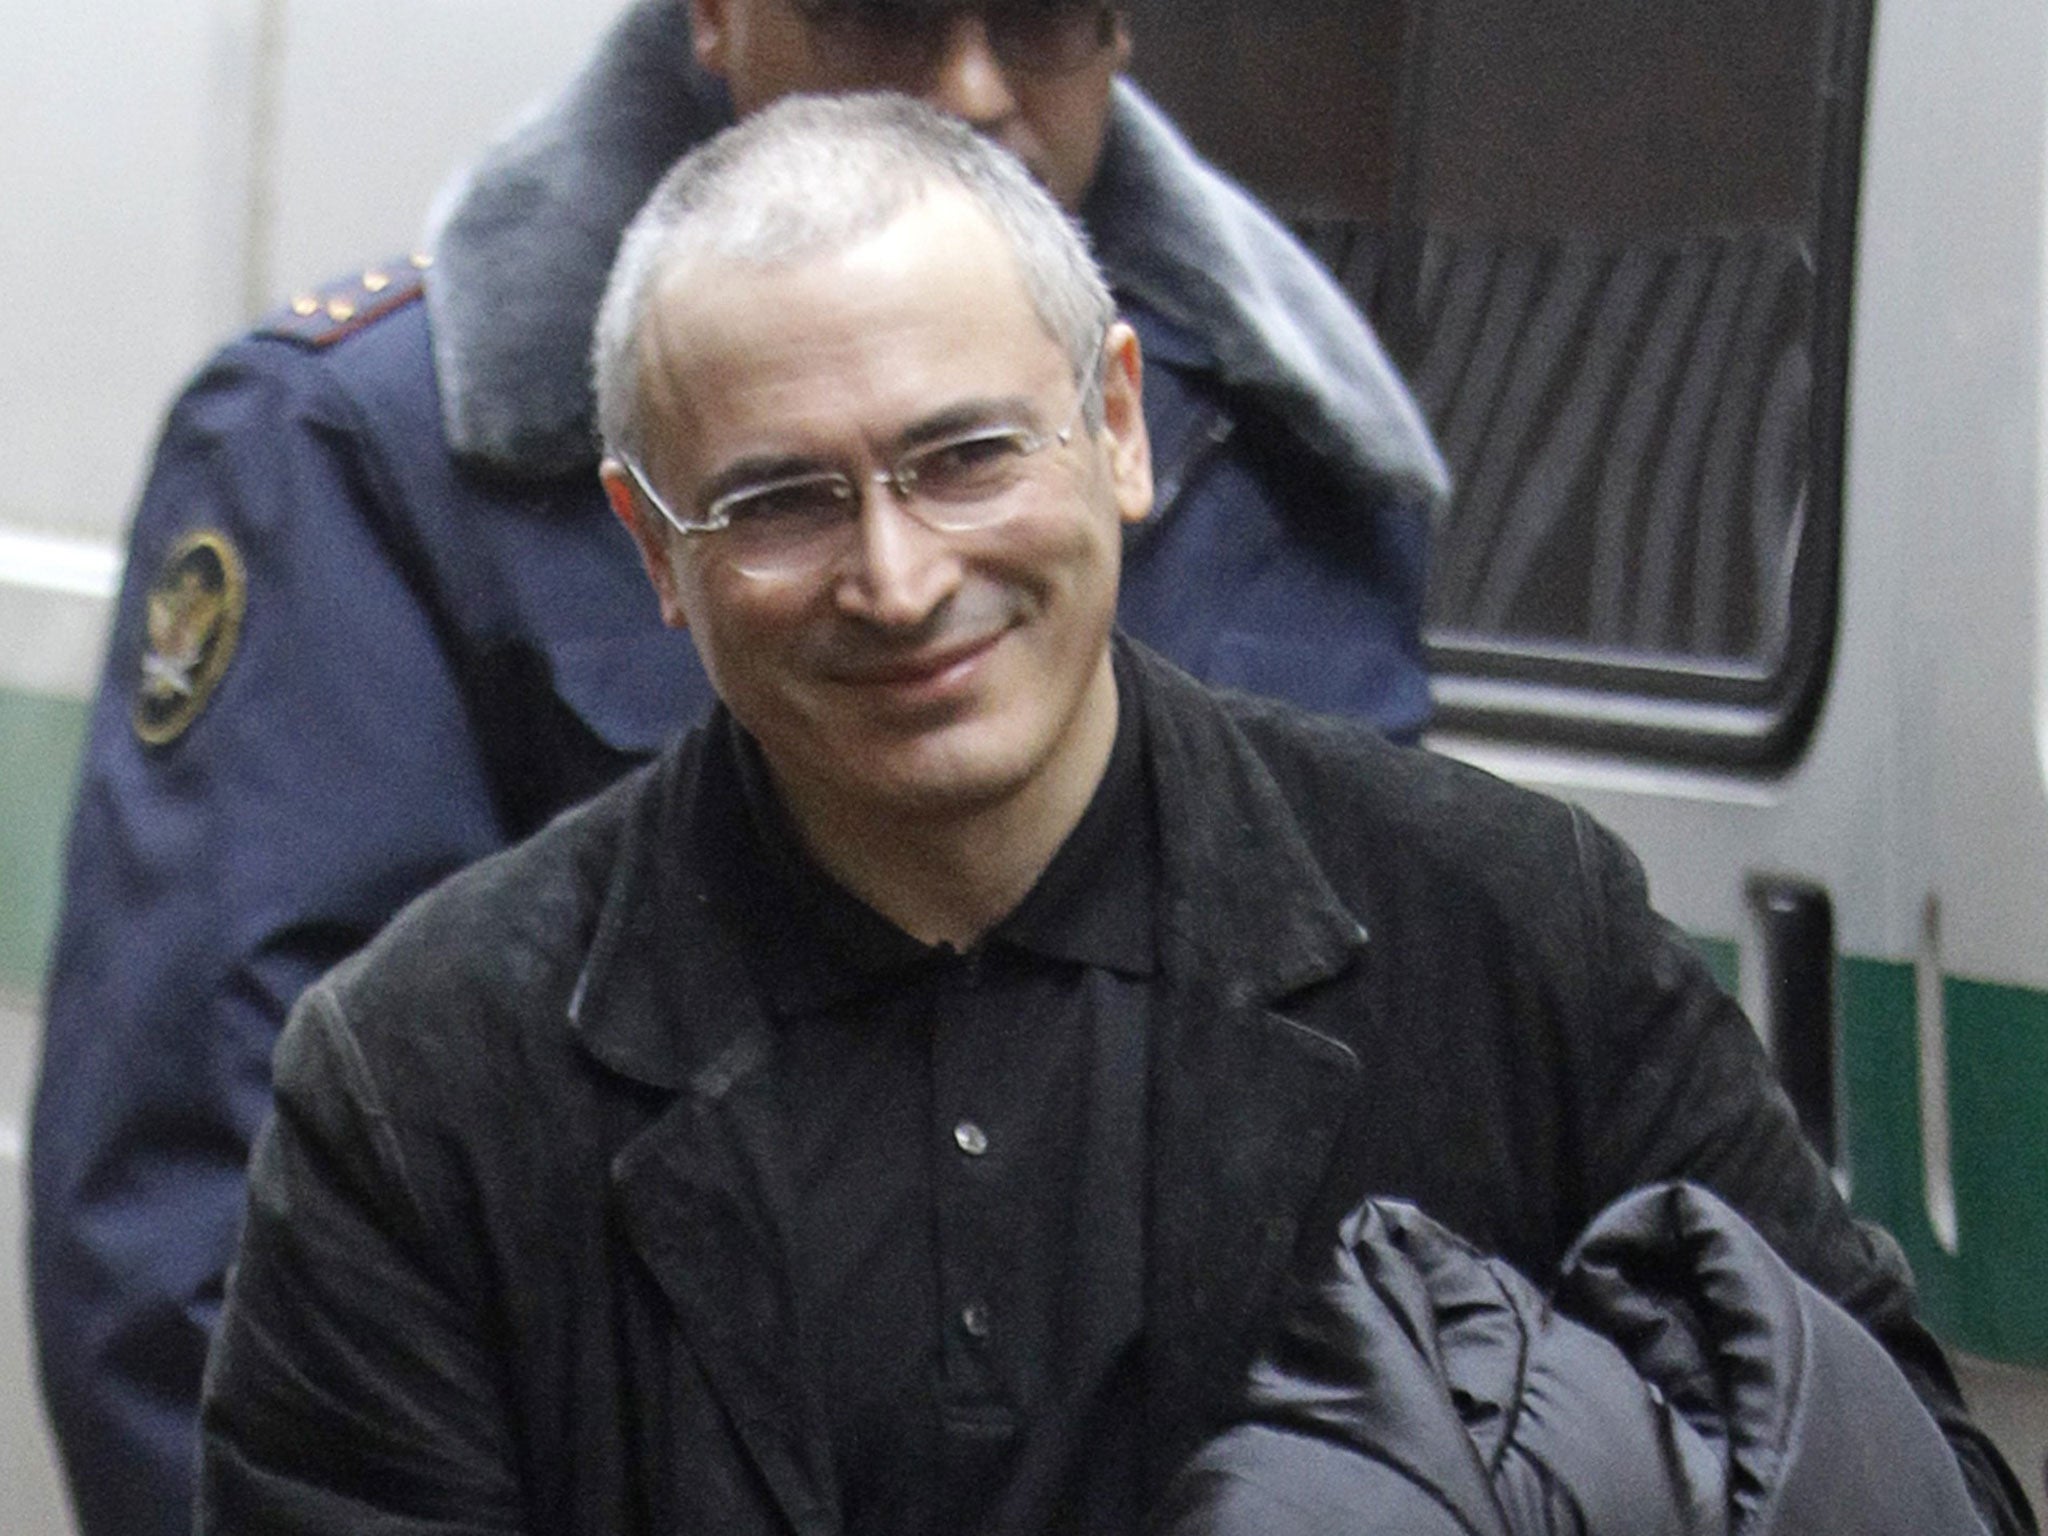 Mikhail Khodorkovsky has spent the last 10 years in prison on charges of tax evasion and embezzlement